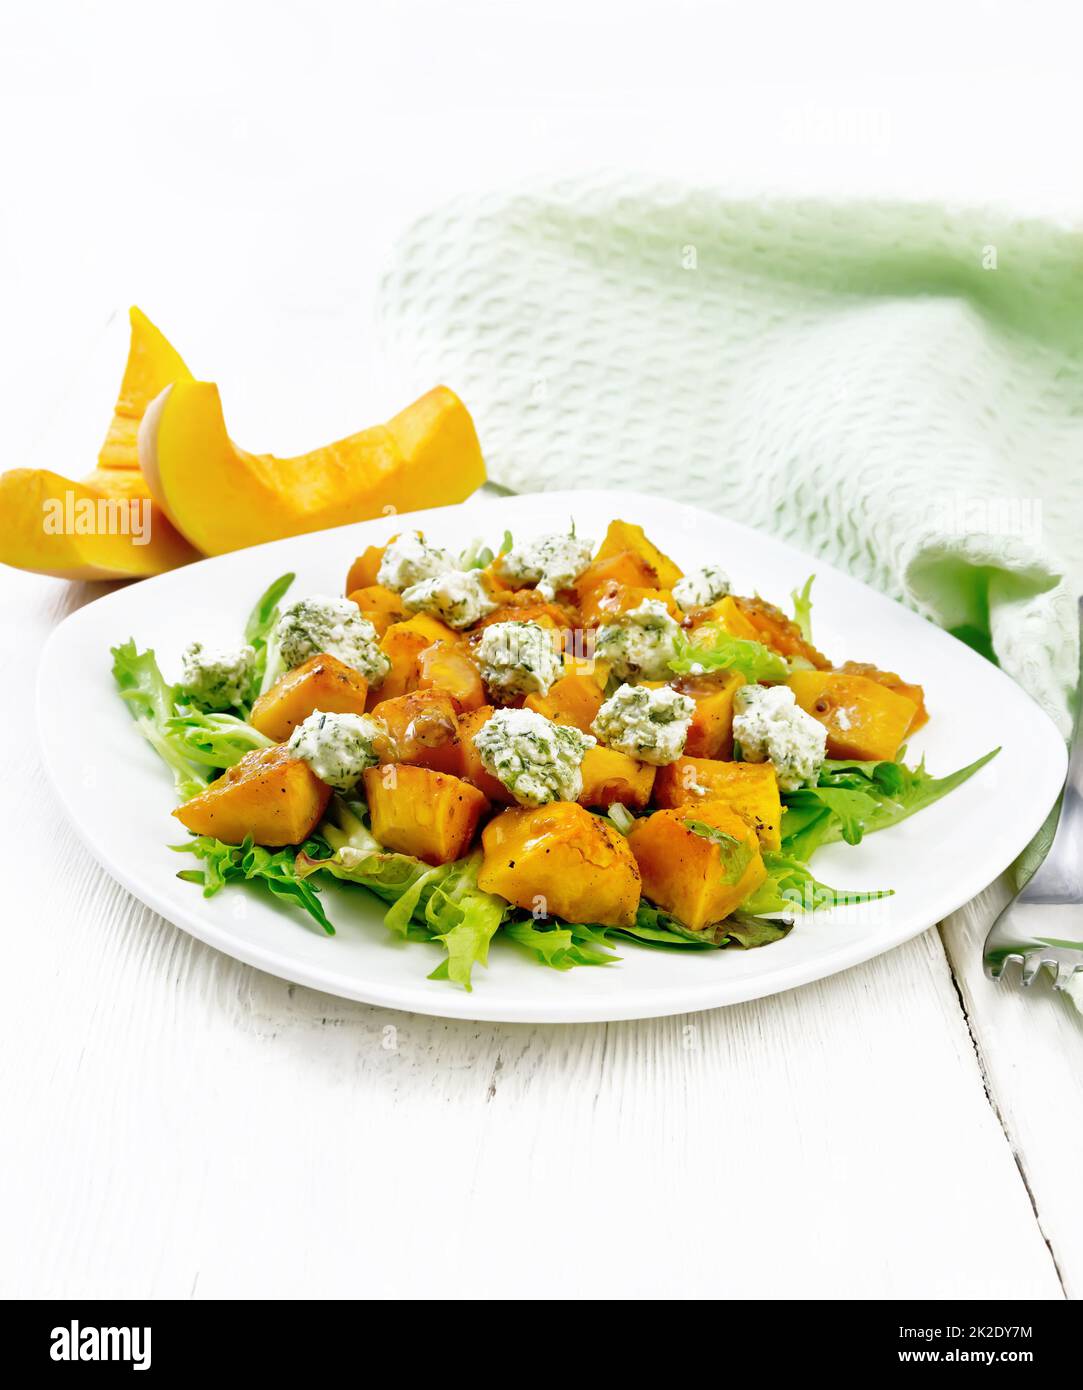 Salad of pumpkin and cheese in plate on light wooden board Stock Photo